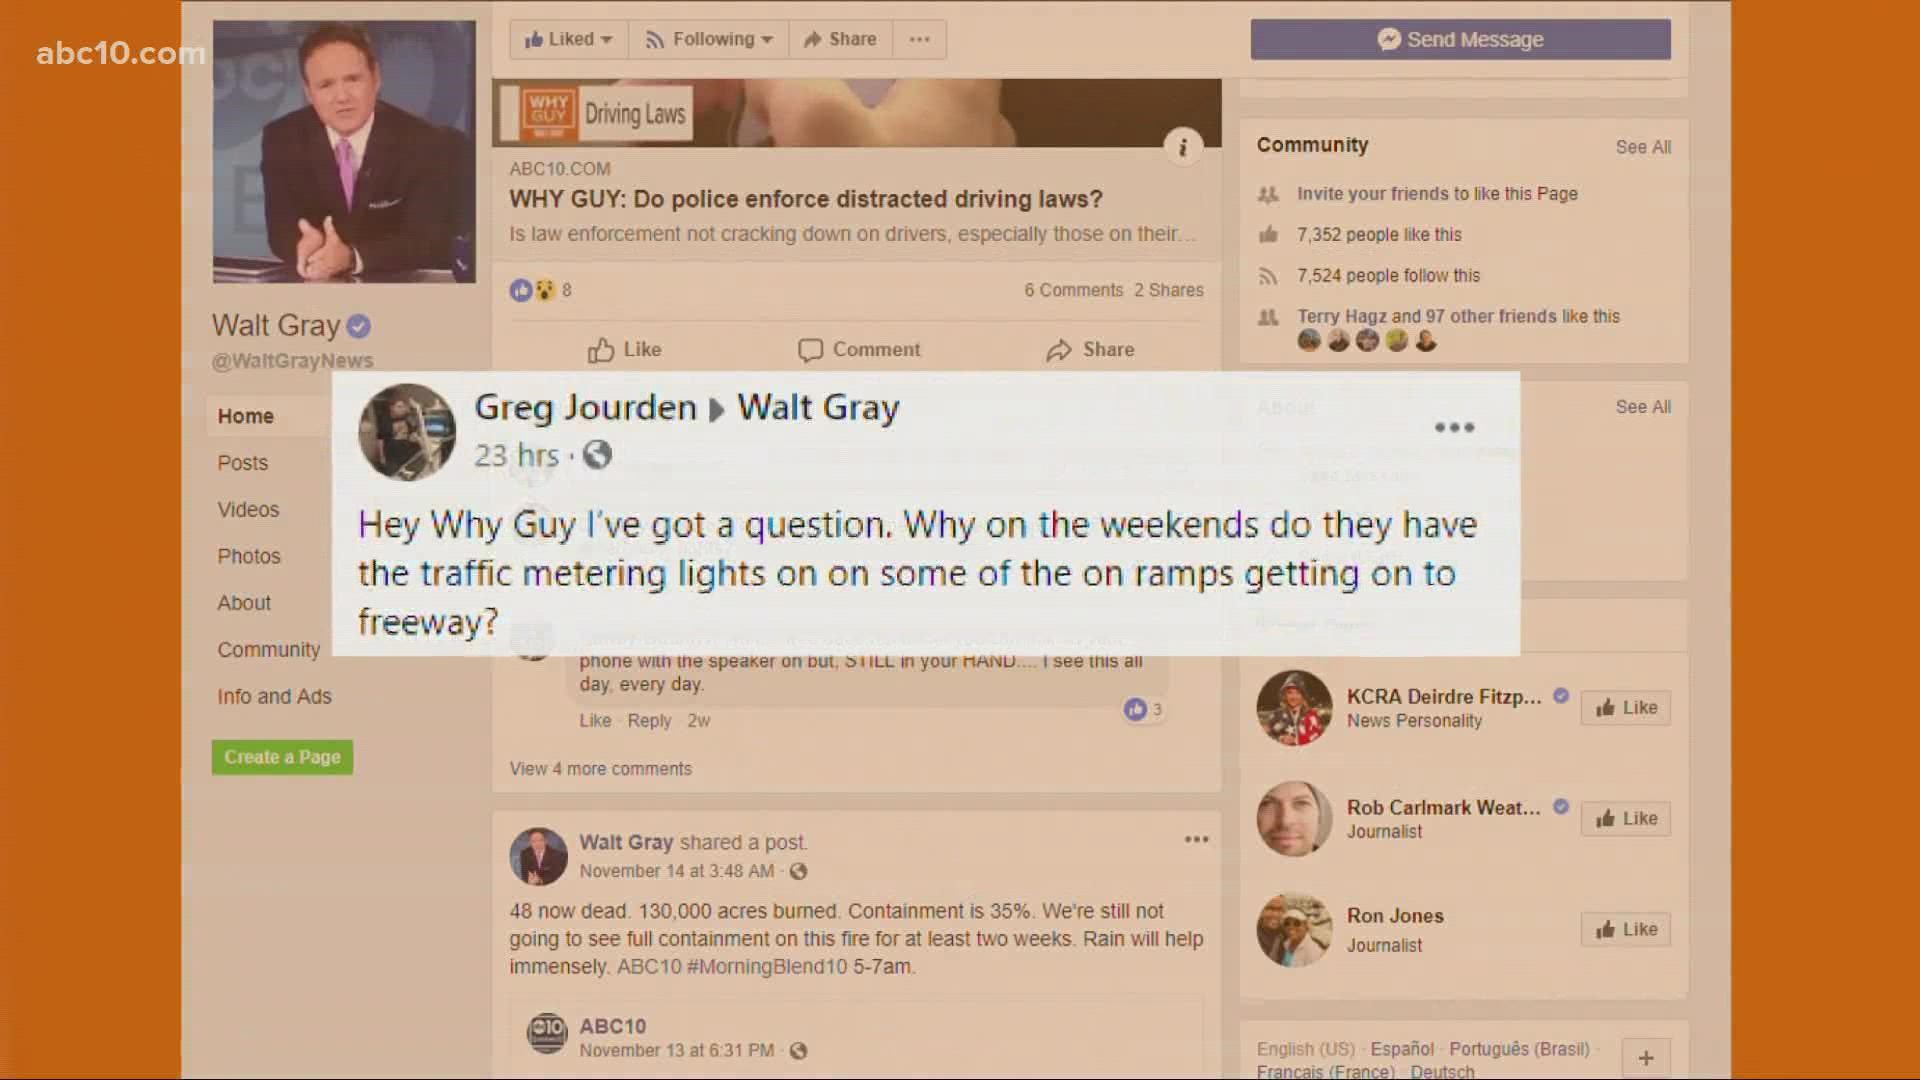 ABC10's Walt Gray is back with another Why Guy, this time answering the question of why traffic meter lights are on on some of the freeways during the weekends.